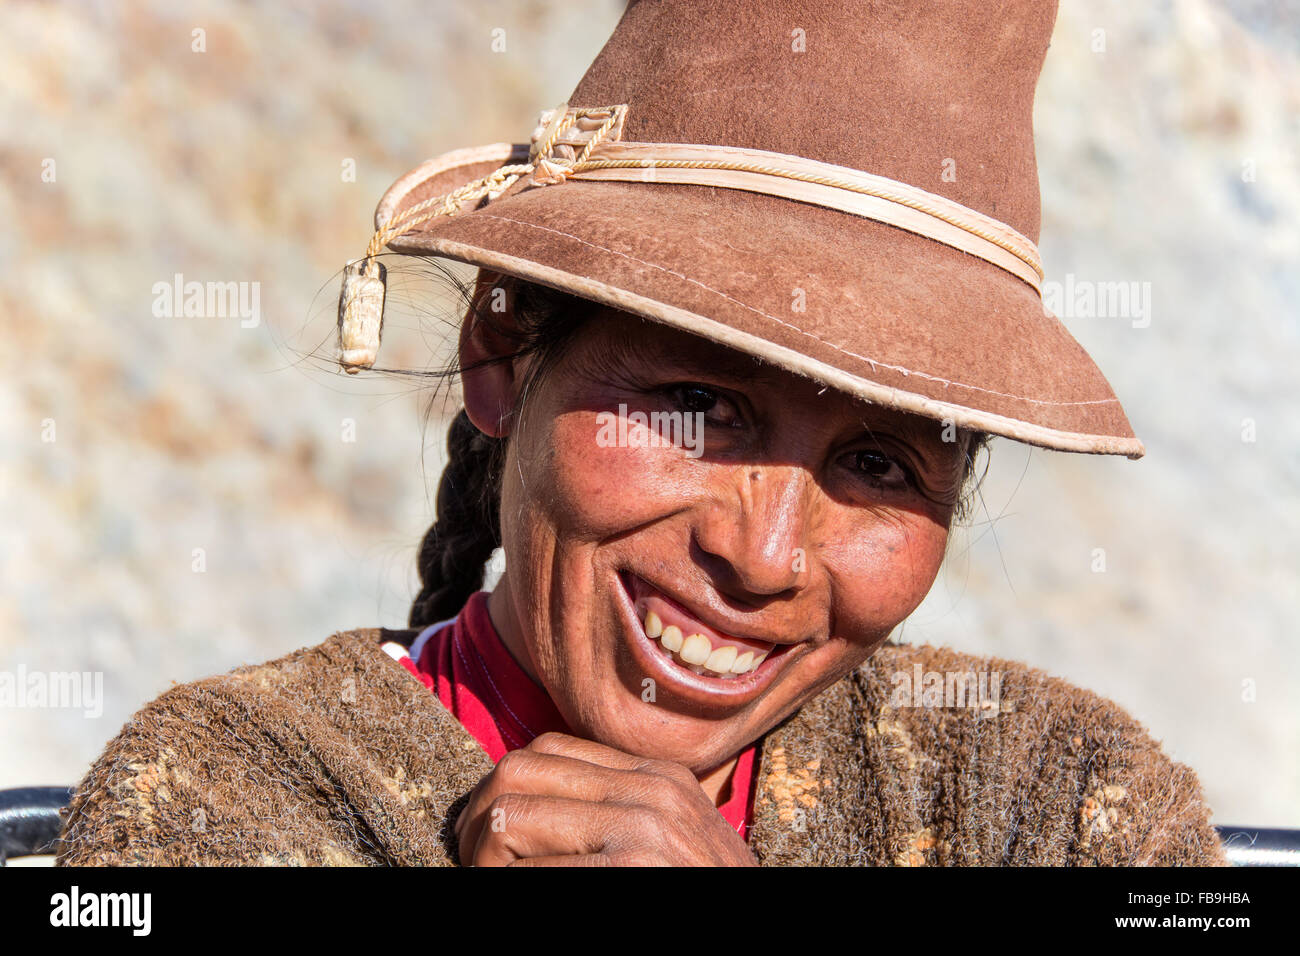 Indigenous woman with hat, laughing, Cusco, Peru Stock Photo